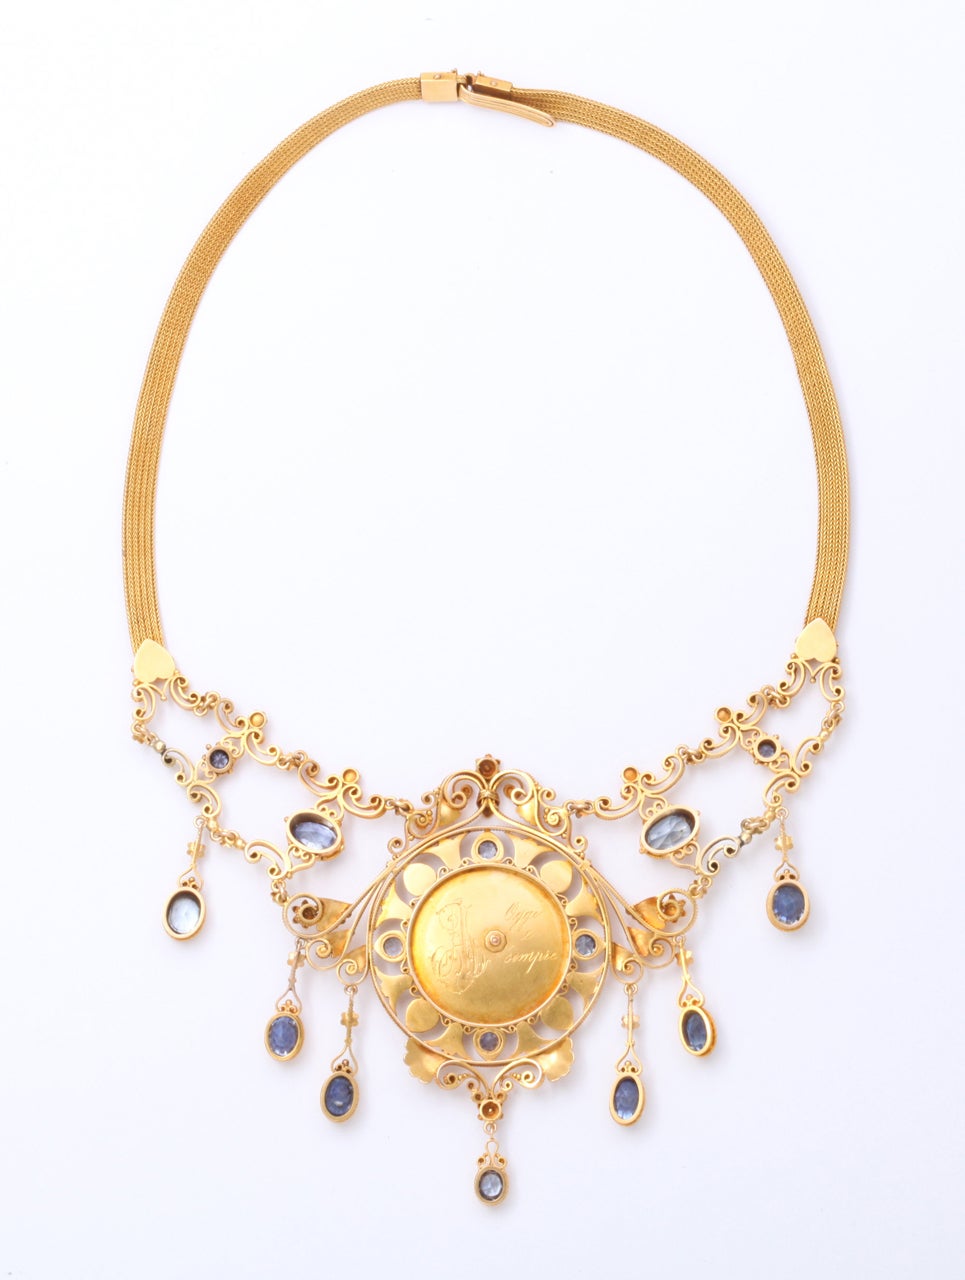 Magnificent. I can stop here and let your eyes do the rest.
The necklace:  An 18kt gold with natural sapphires and natural pearls, centered with a gold cameo plaque on which the beautiful form of a woman is engraved. Her cape is flowing as she